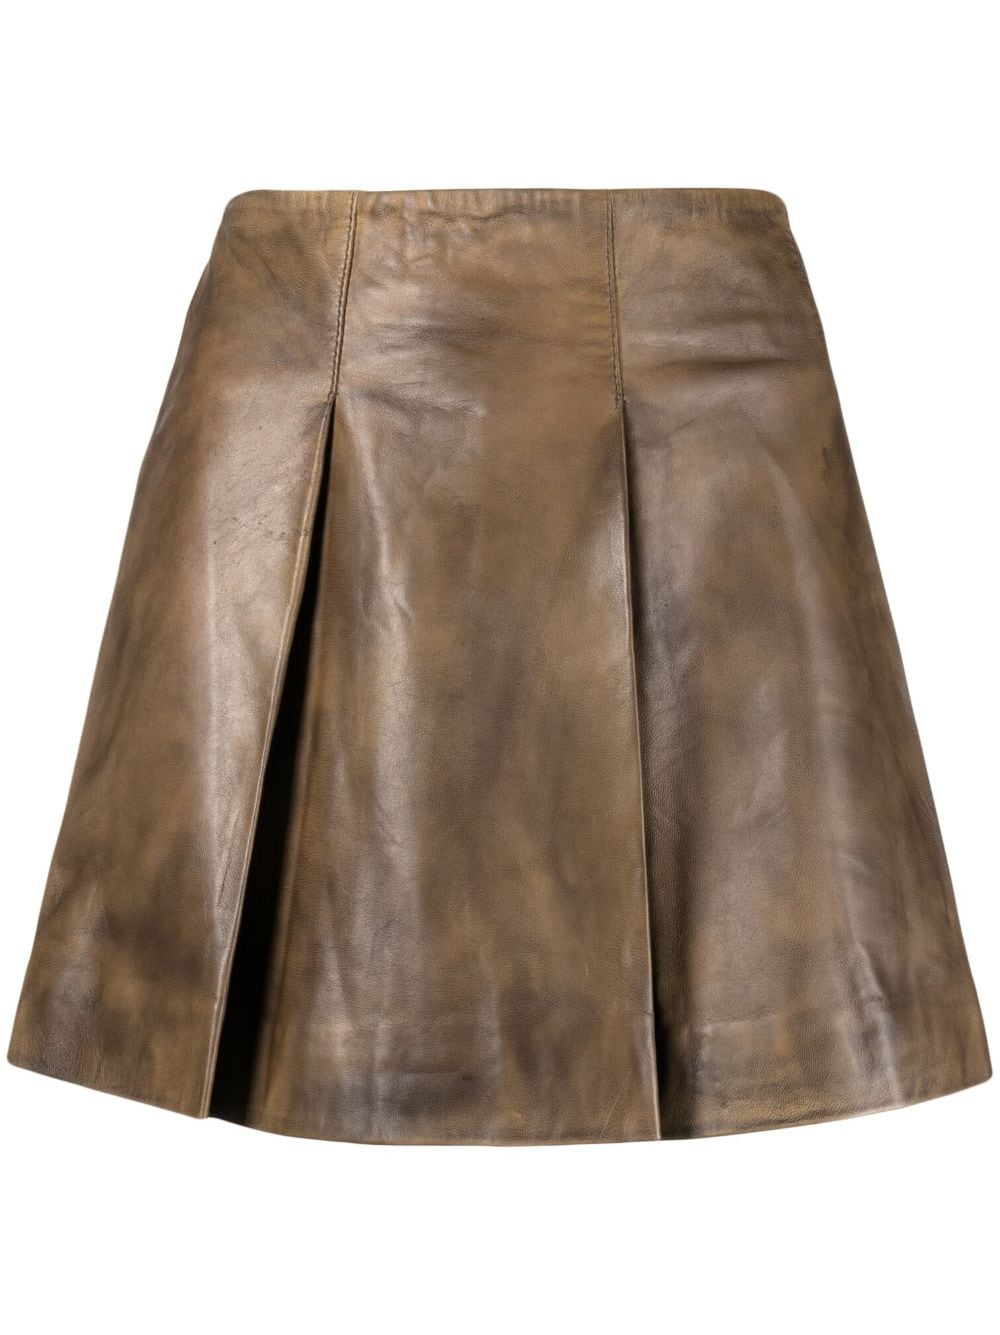 Remain Pleated A-line Leather Miniskirt In Brown